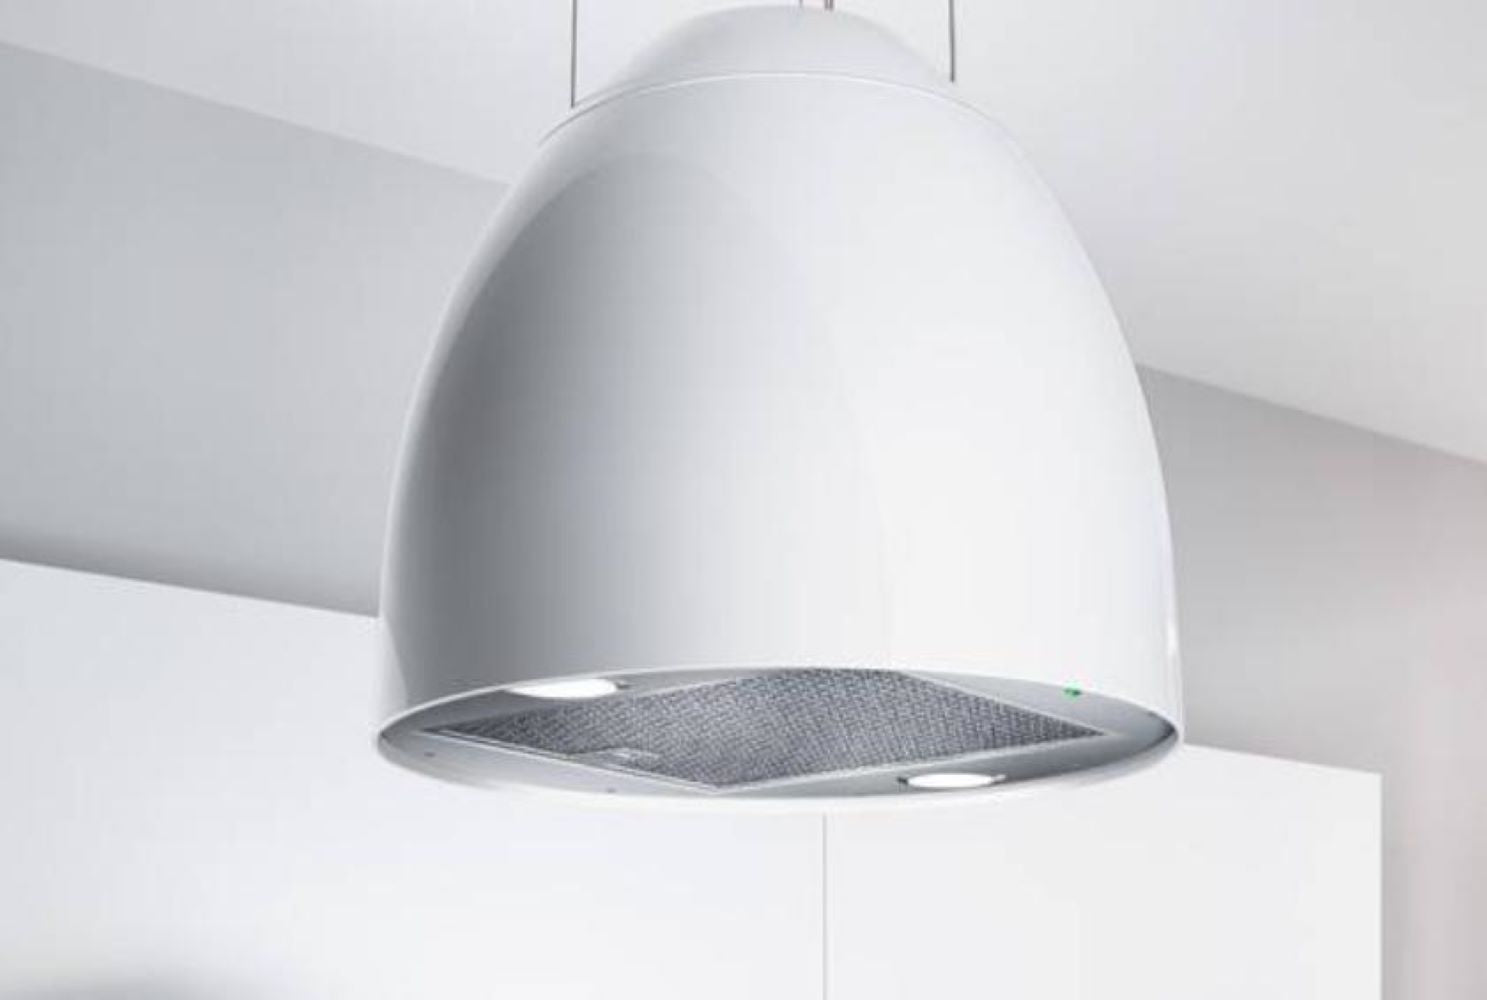 Airforce New Moon 45cm Island Cooker Hood with Integra System - White